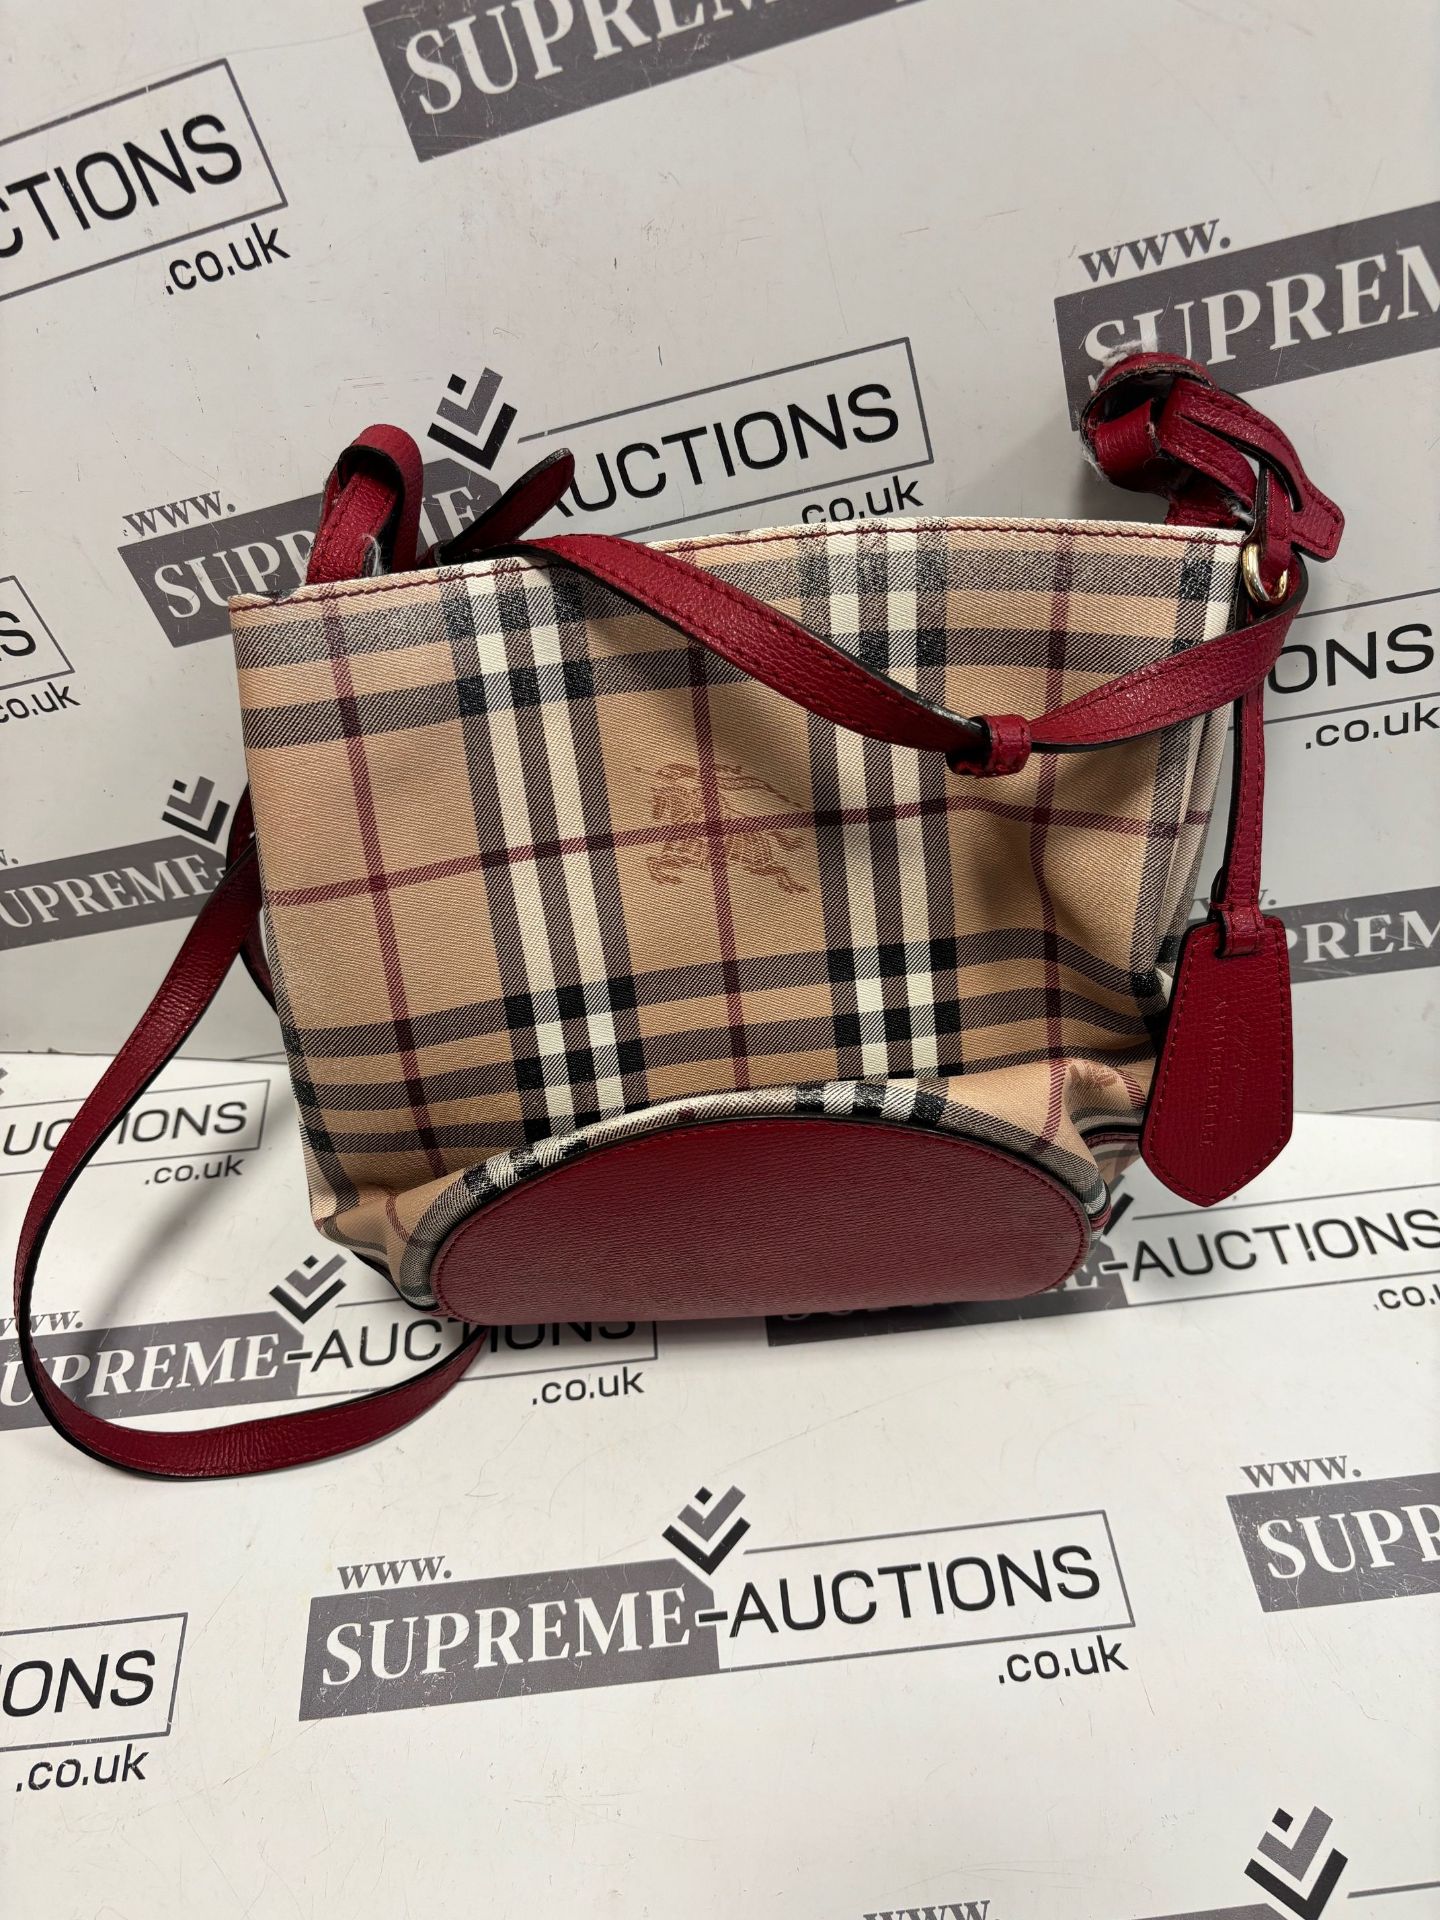 (No Vat) Burberry Leather And Haymarket Check Crossbody Bucket Bag Poppy Red approx 23x22cm. - Image 7 of 10